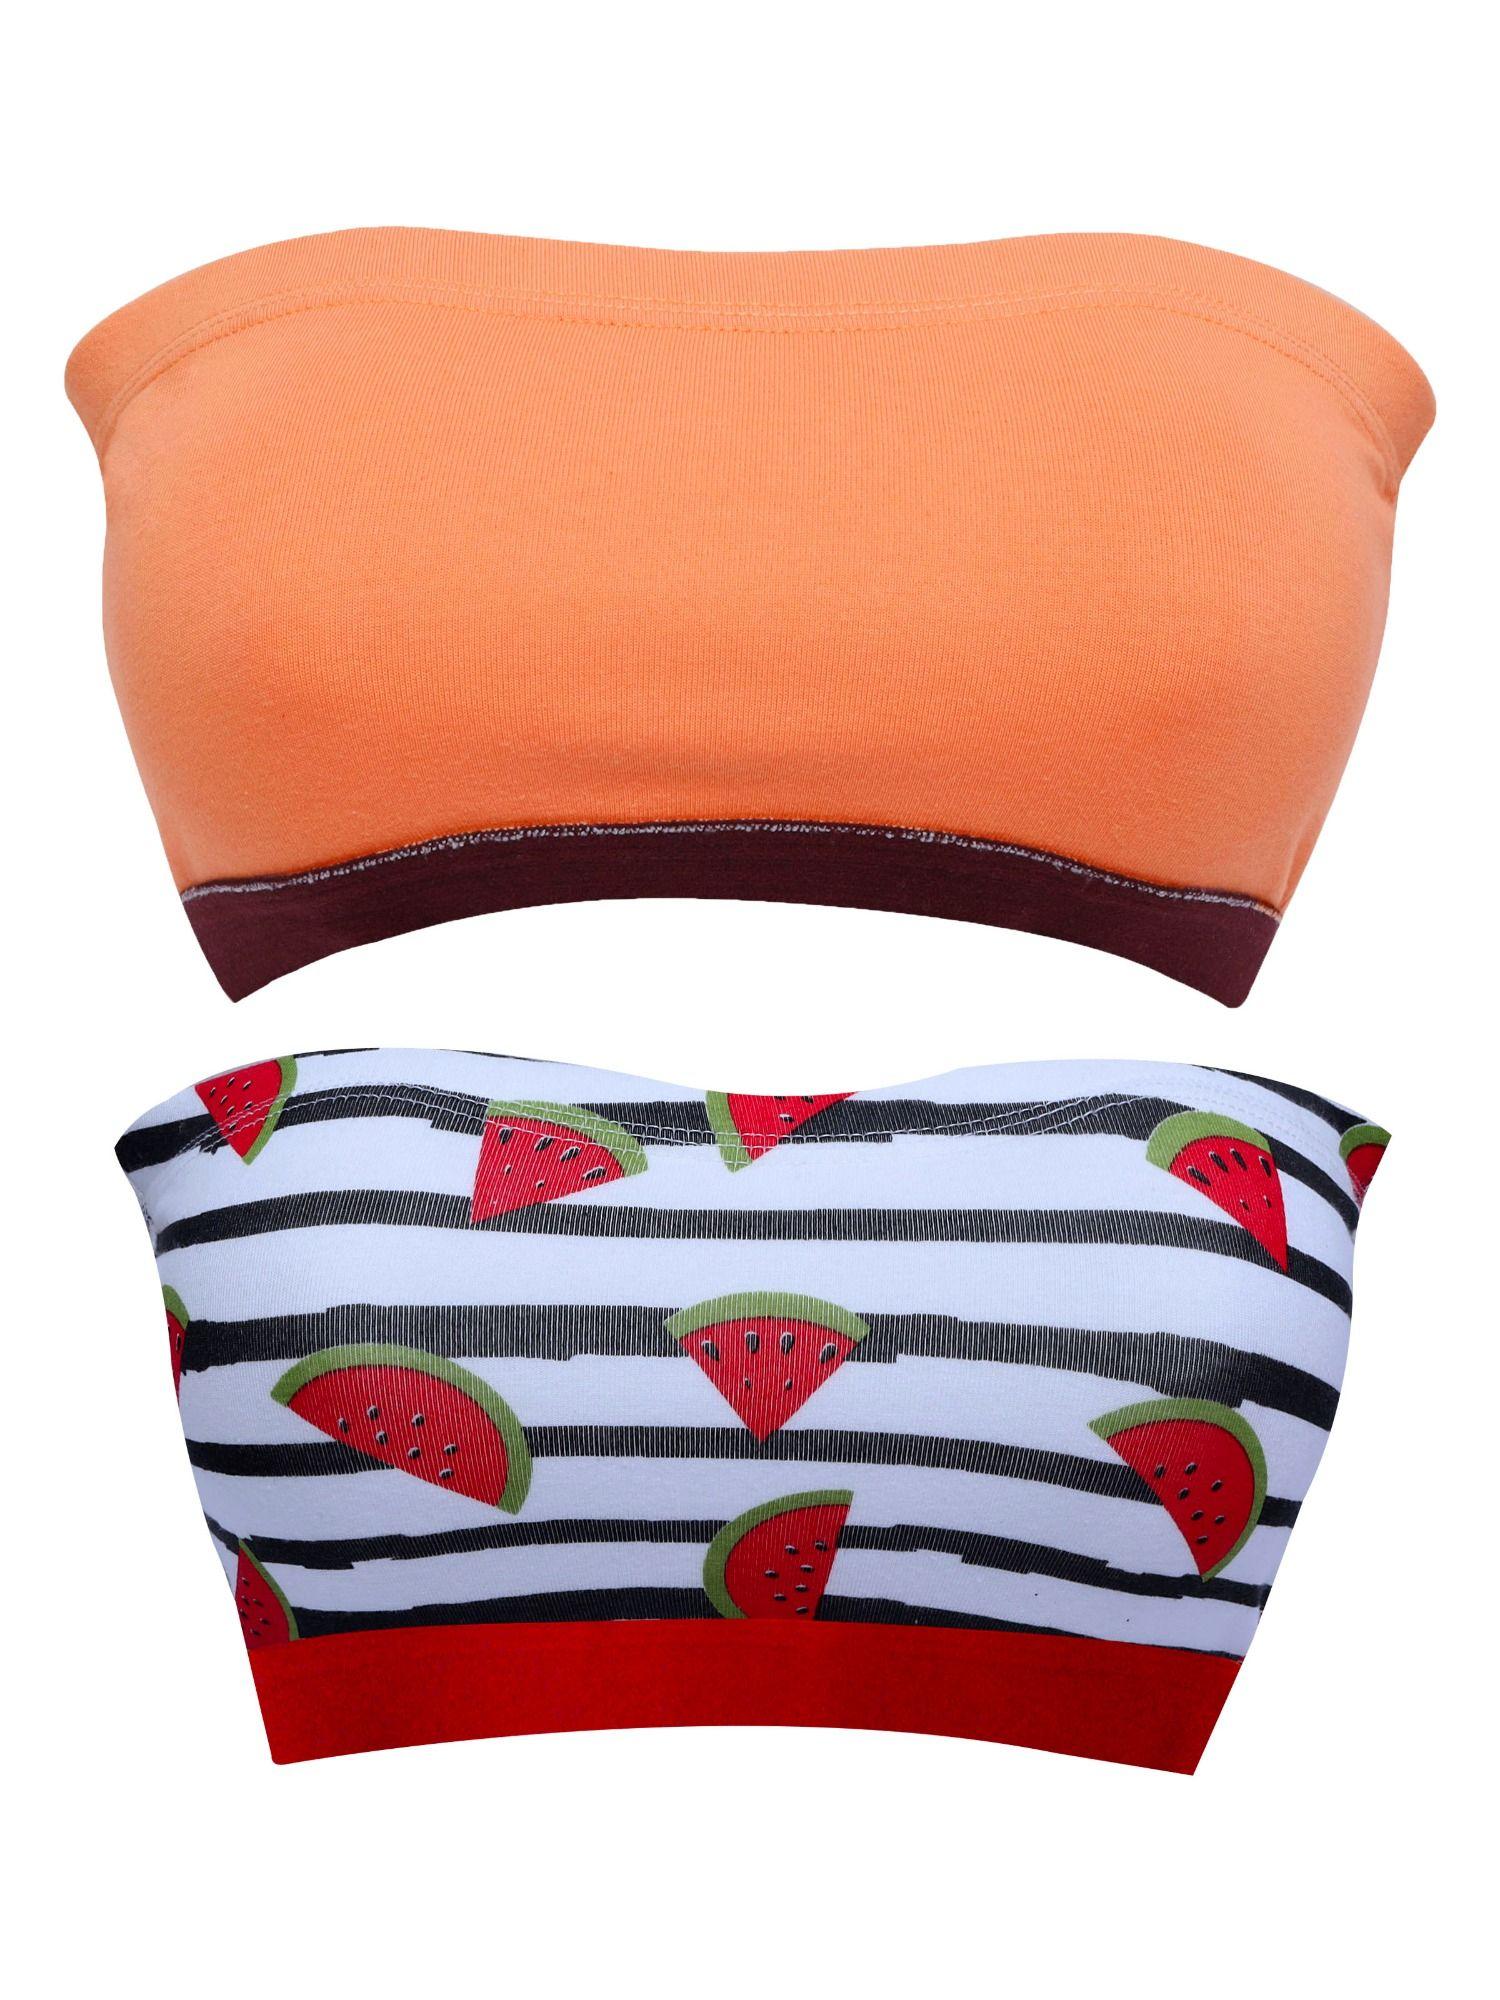 strapless bra for girls watermelon print and peach (pack of 2)